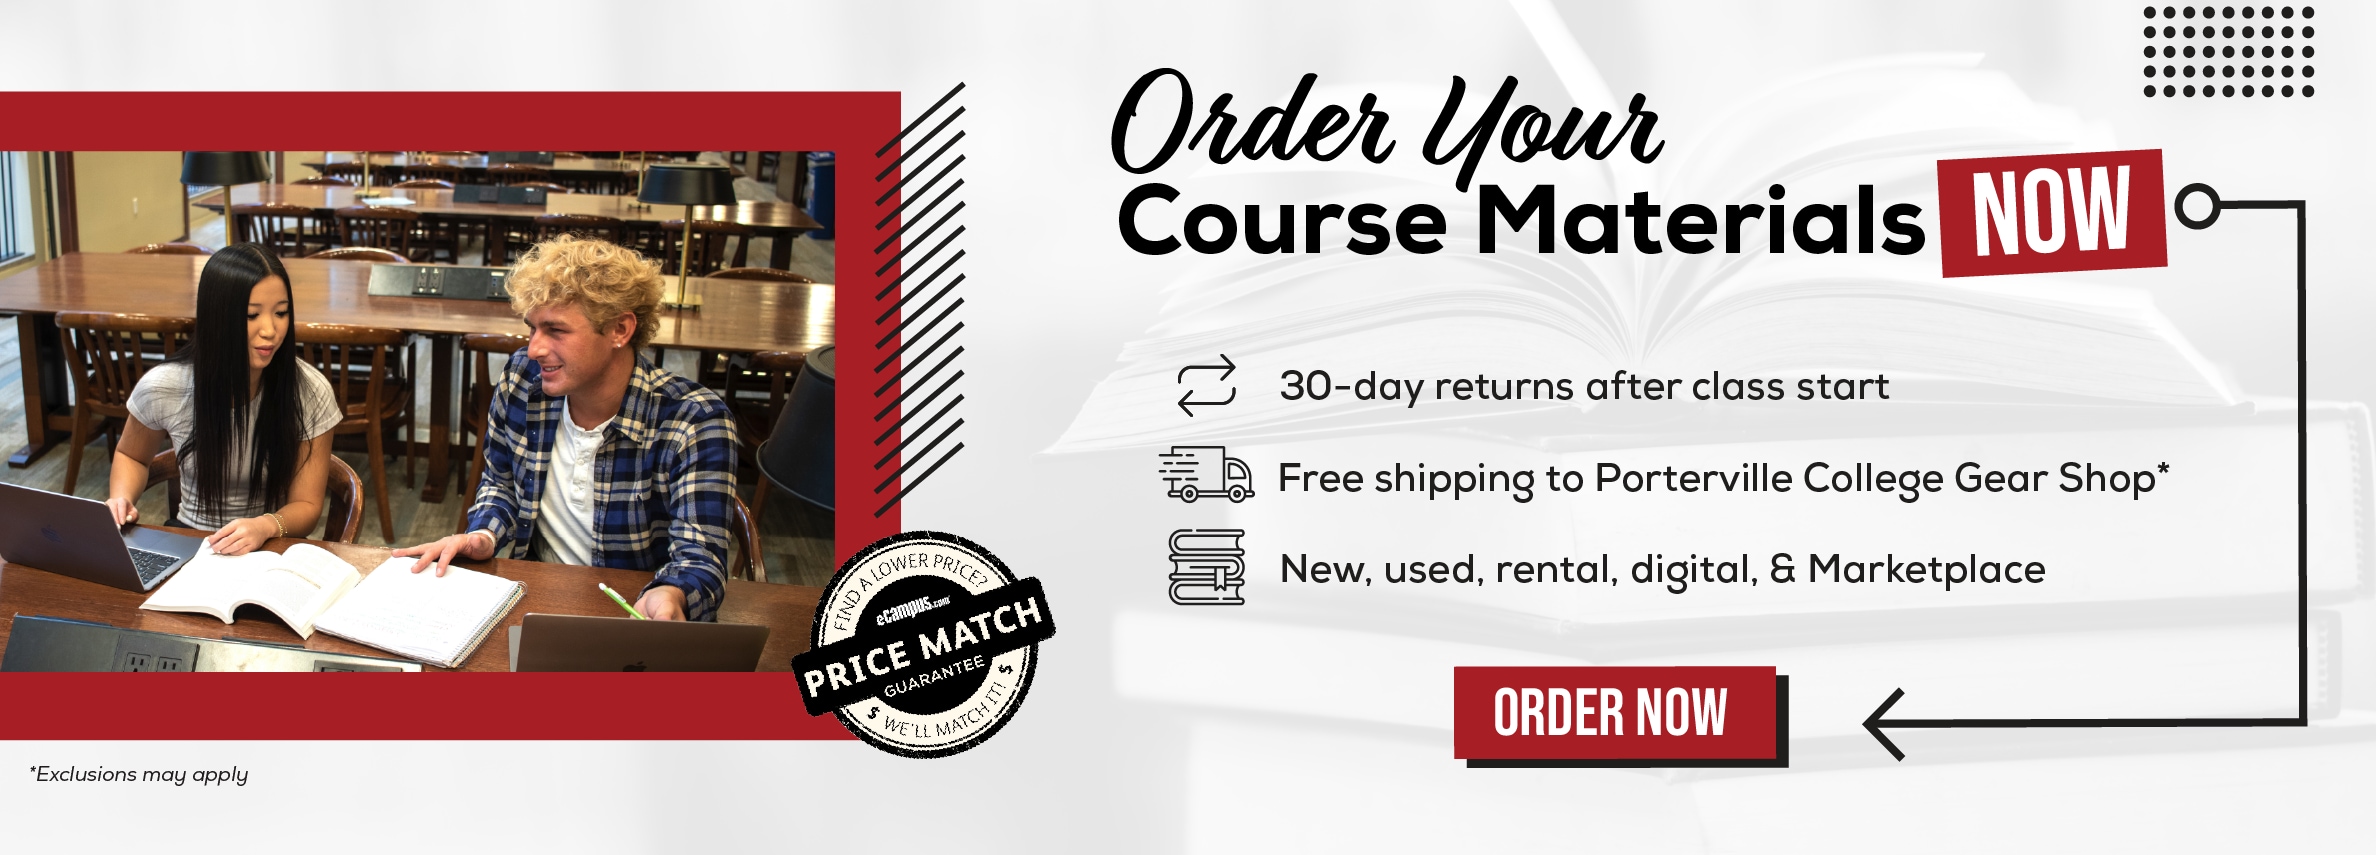 Order Your Course Materials Now. 30-day returns after class start. Free shipping to Porterville College Gear Shop New, used, rental, digital, & Marketplace. Order now. *Exclusions may apply.